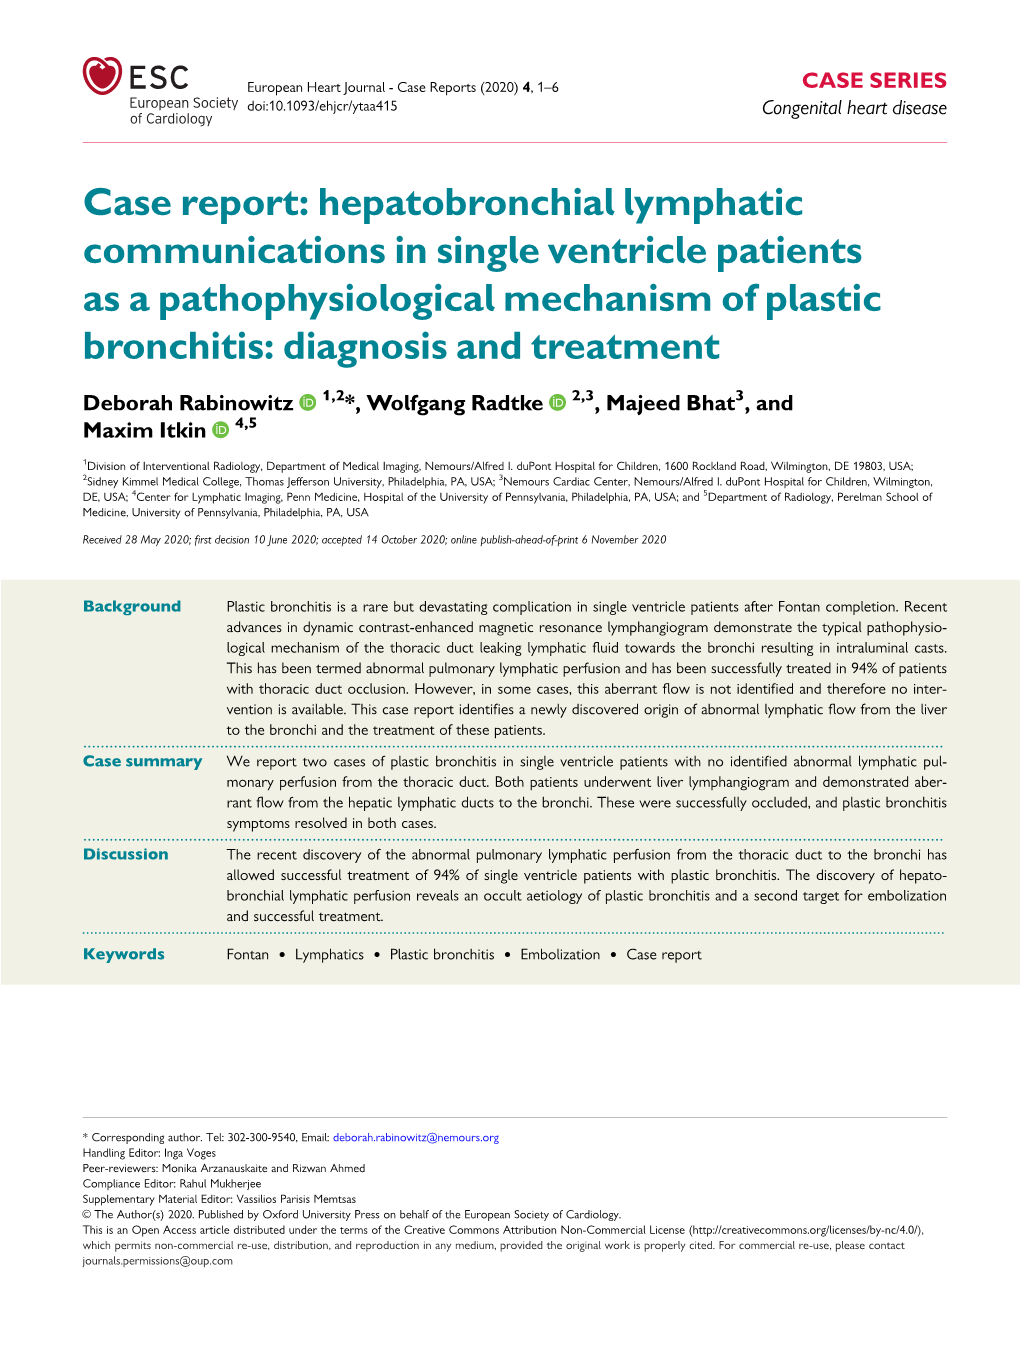 Hepatobronchial Lymphatic Communications in Single Ventricle Patients As a Pathophysiological Mechanism of Plastic Bronchitis: Diagnosis and Treatment